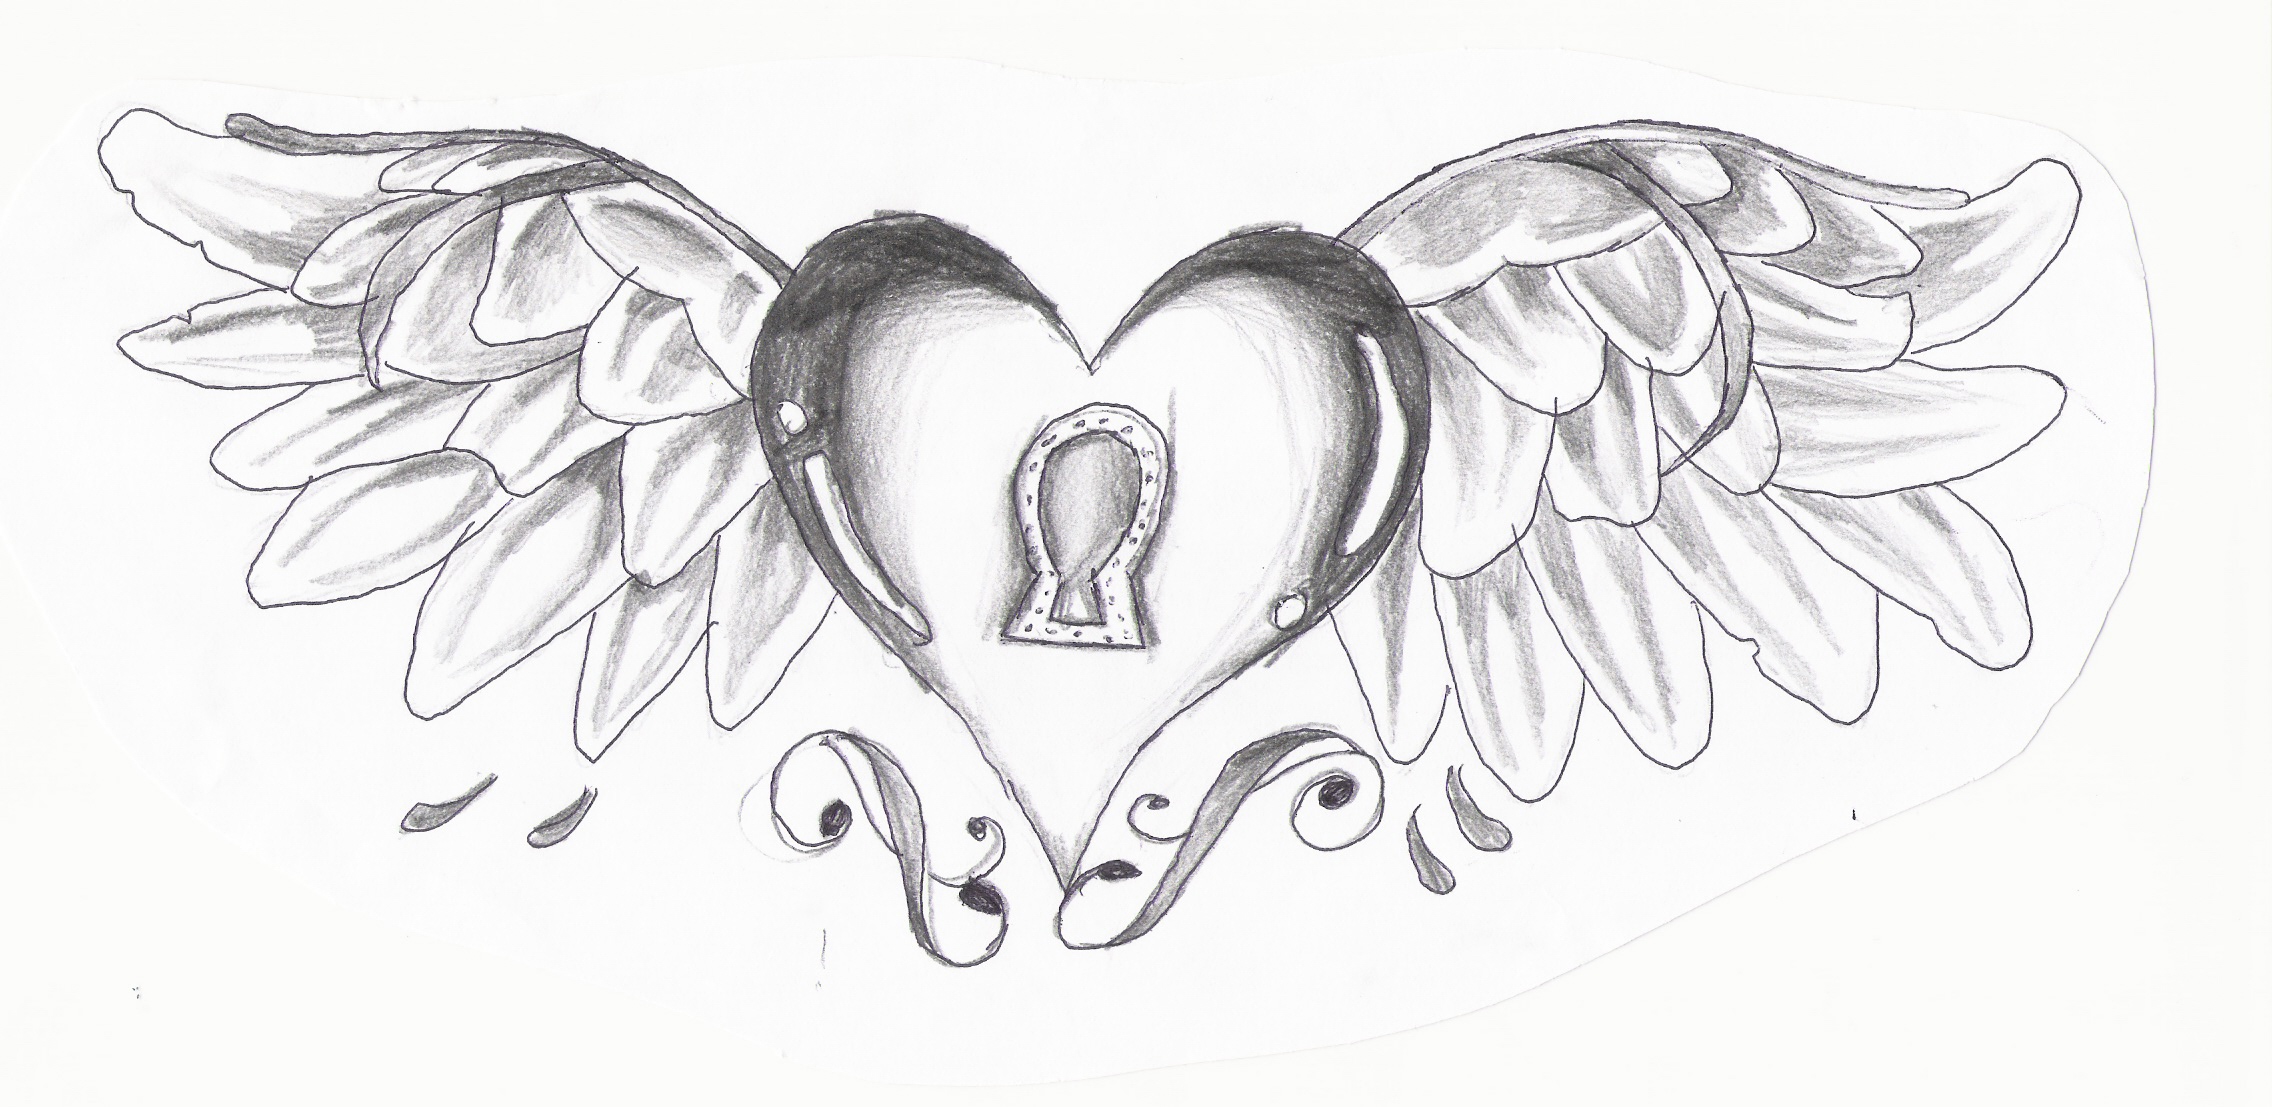 roses drawings with hearts and wings